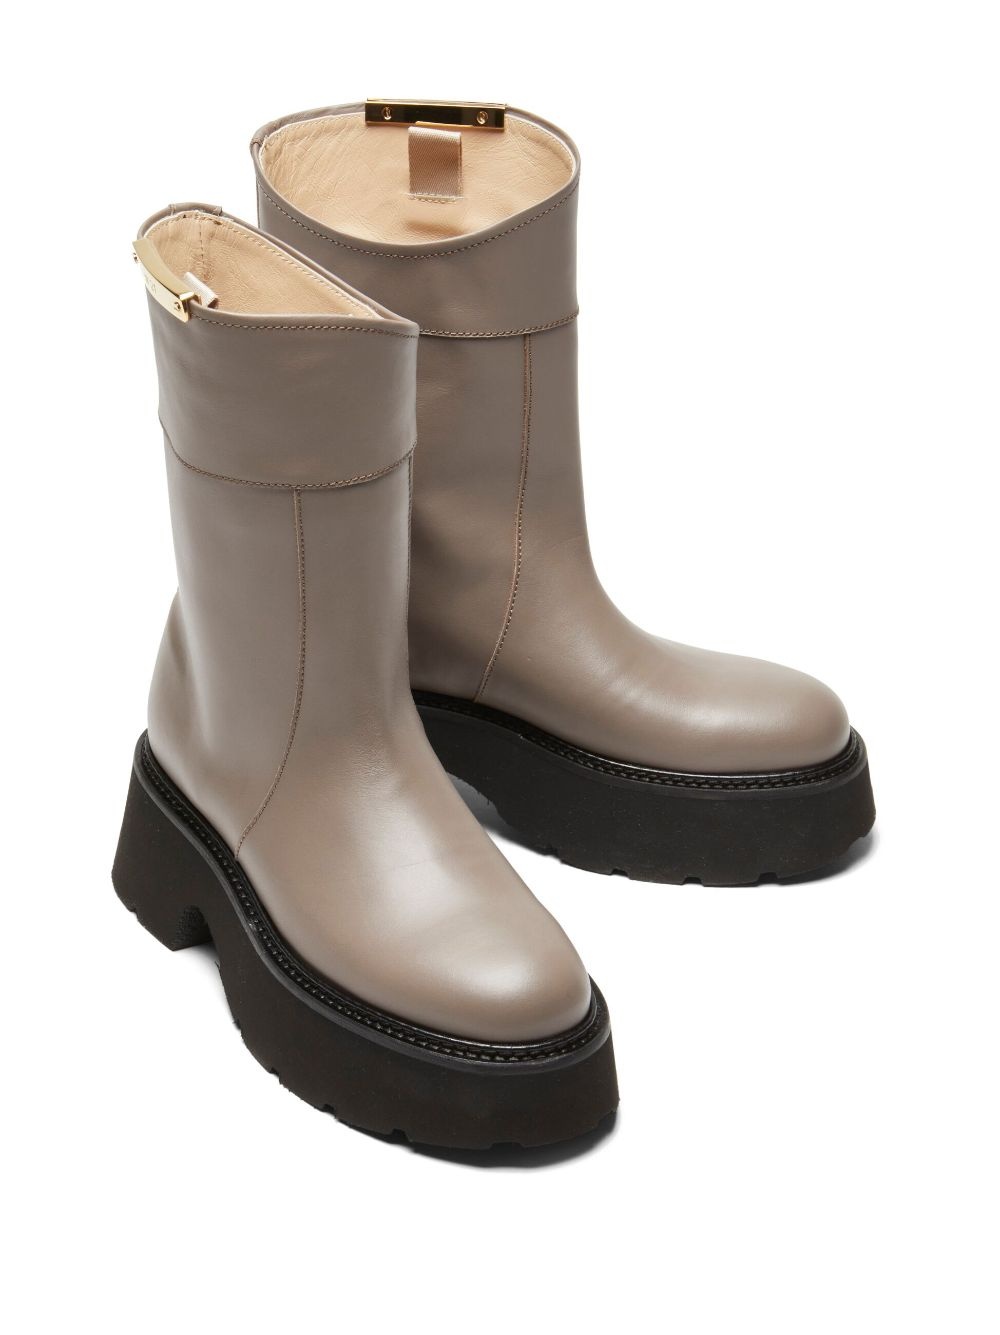 logo-plaque leather boots - 2